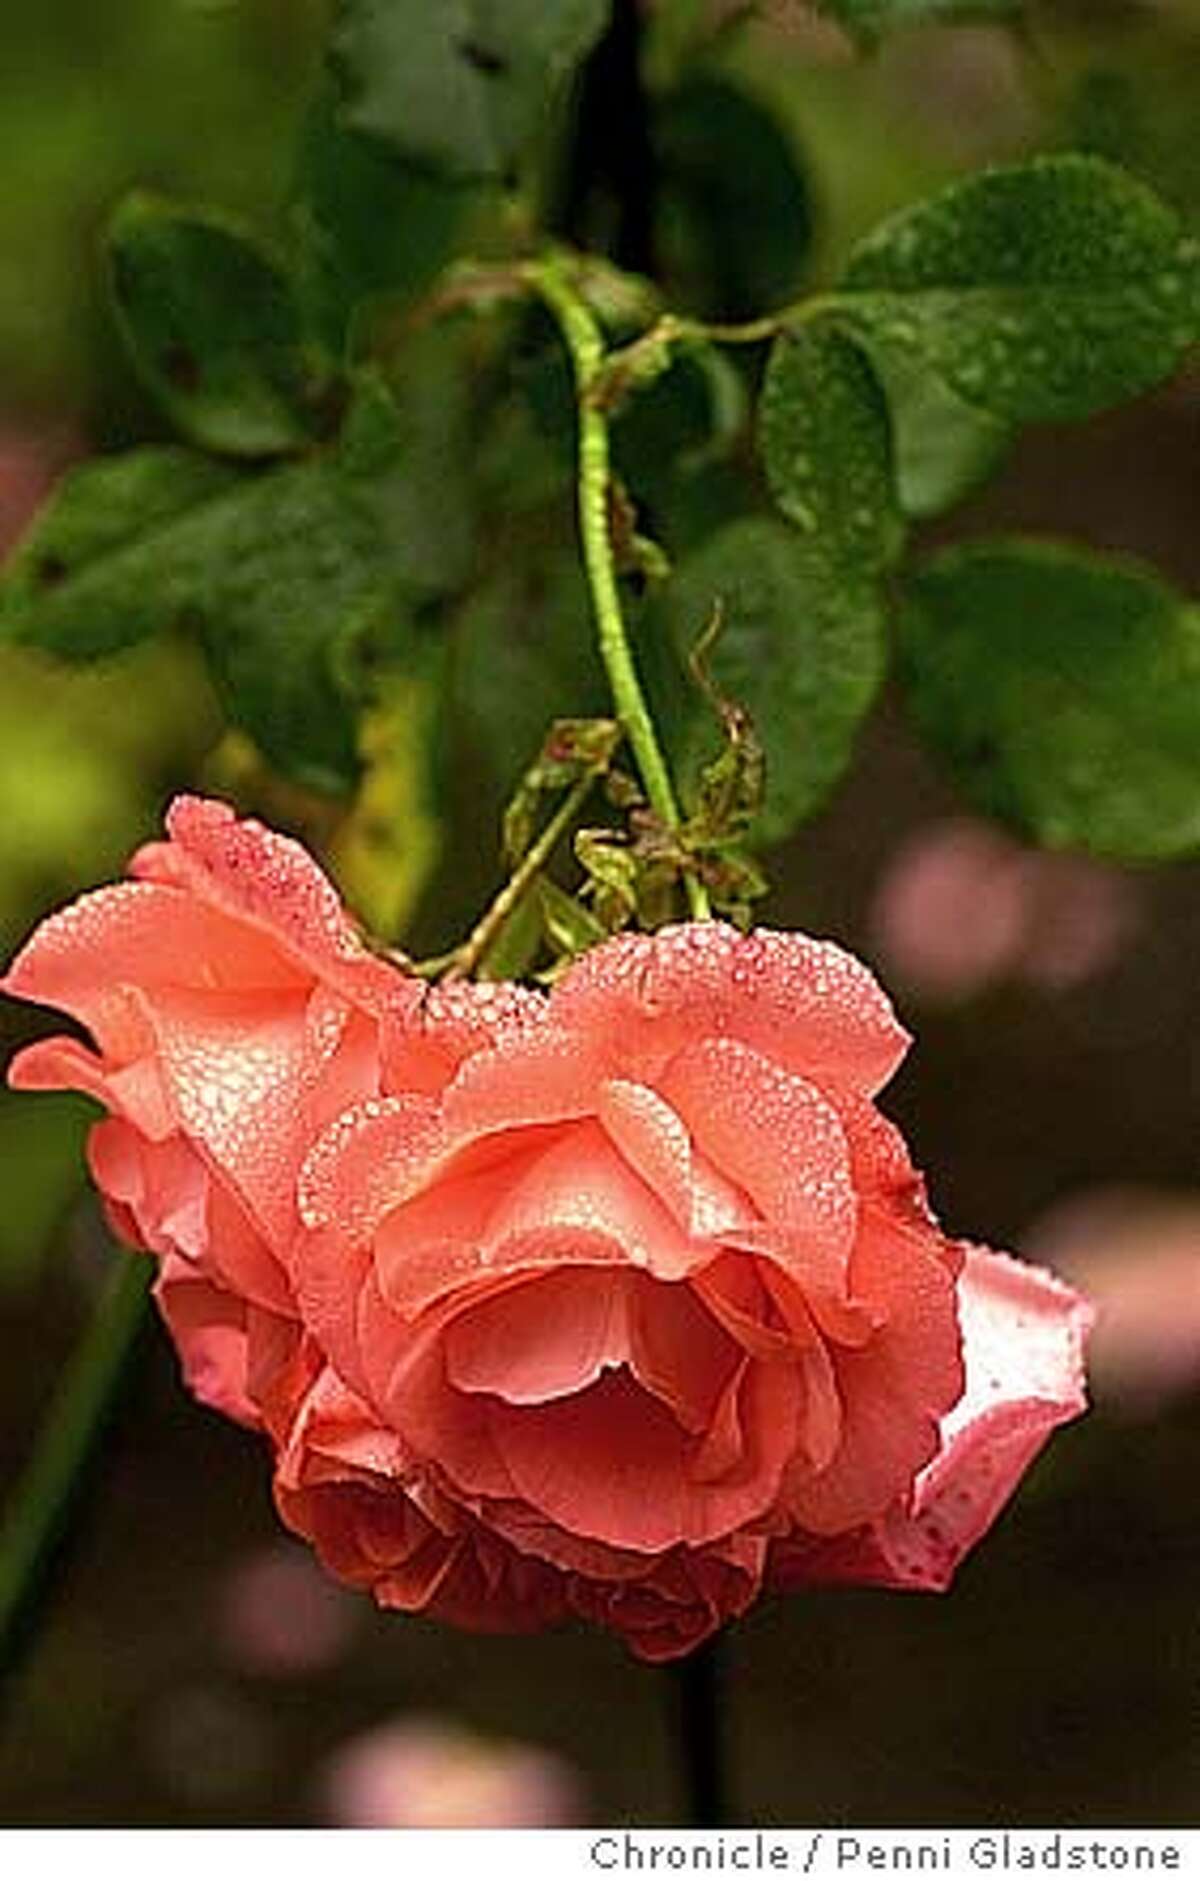 rose called "Marmalade Skies." GOLDEN gate park rose garden 7/29/04 in San Francisco. Penni Gladstone / The Chronicle